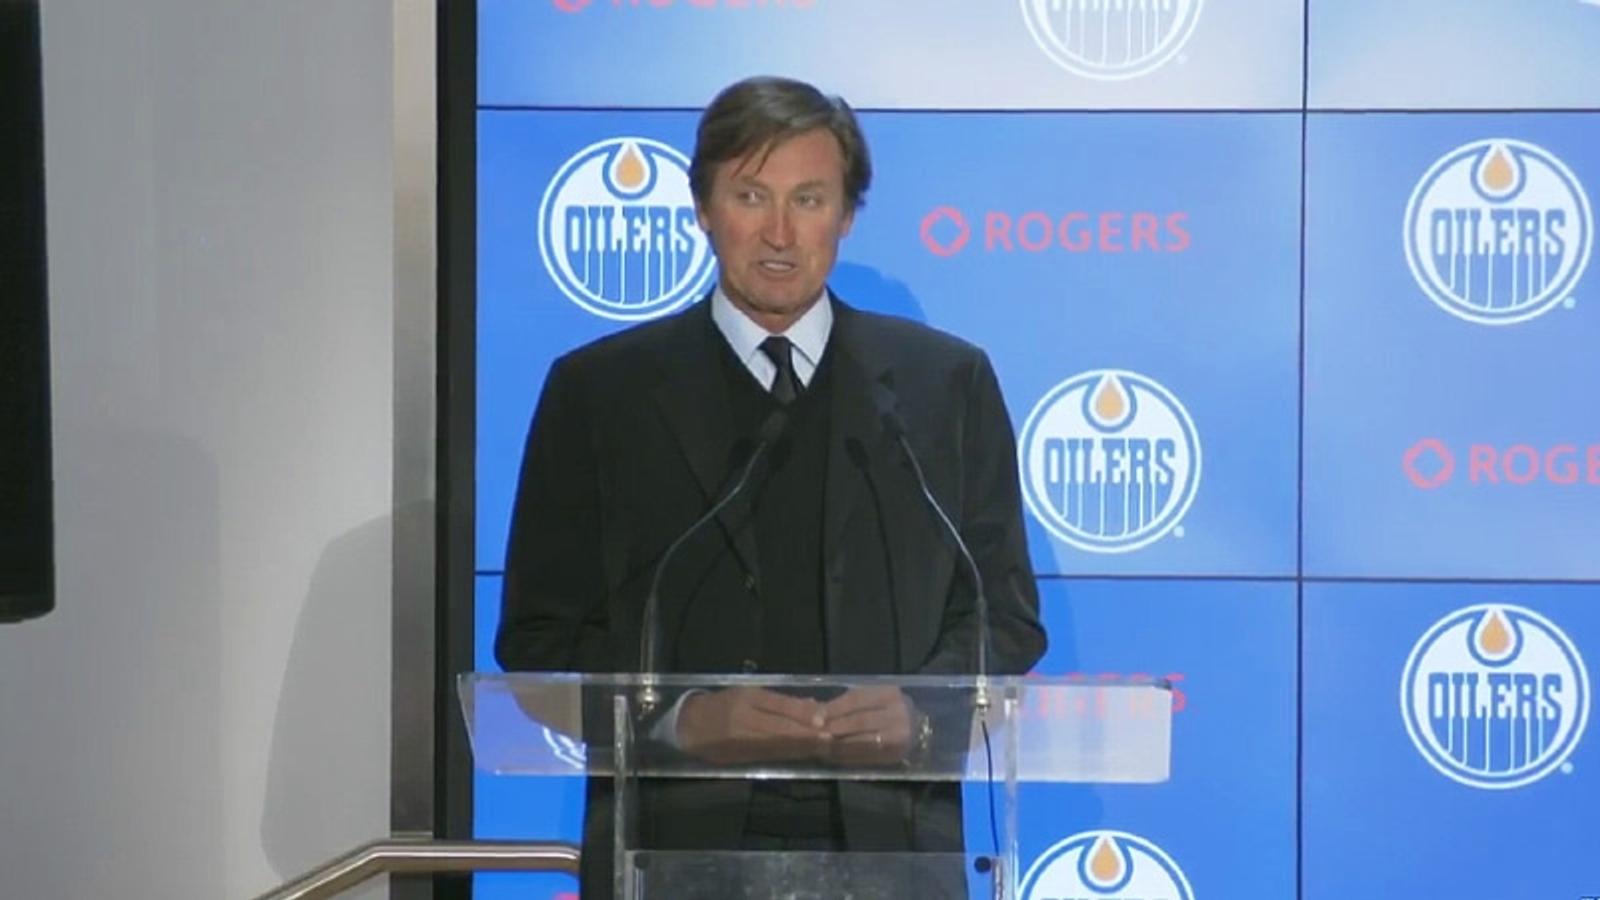 Gretzky steps down as vice chairman of Oilers following brutal playoff elimination 